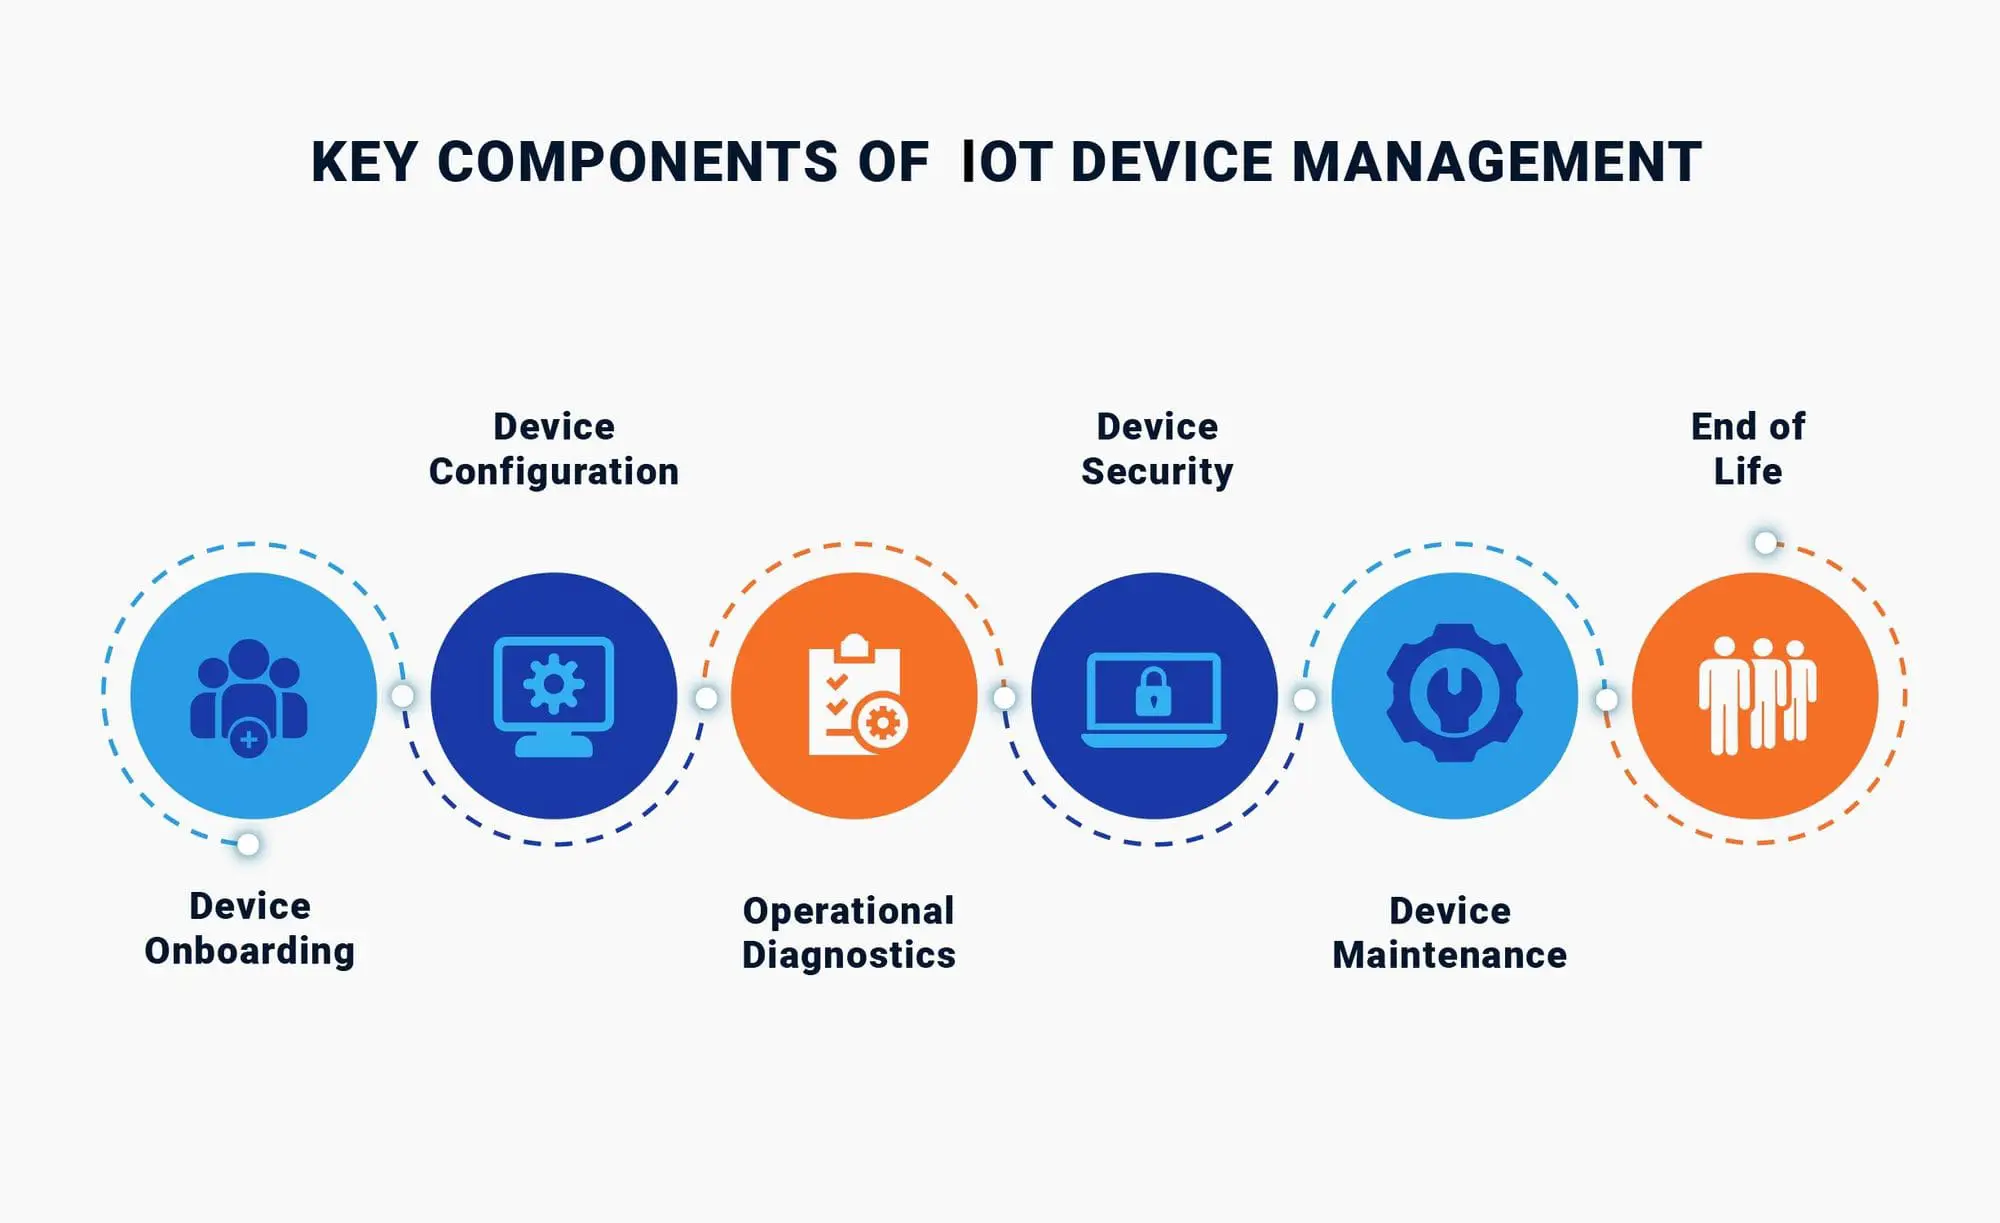 Key components of IoT device management